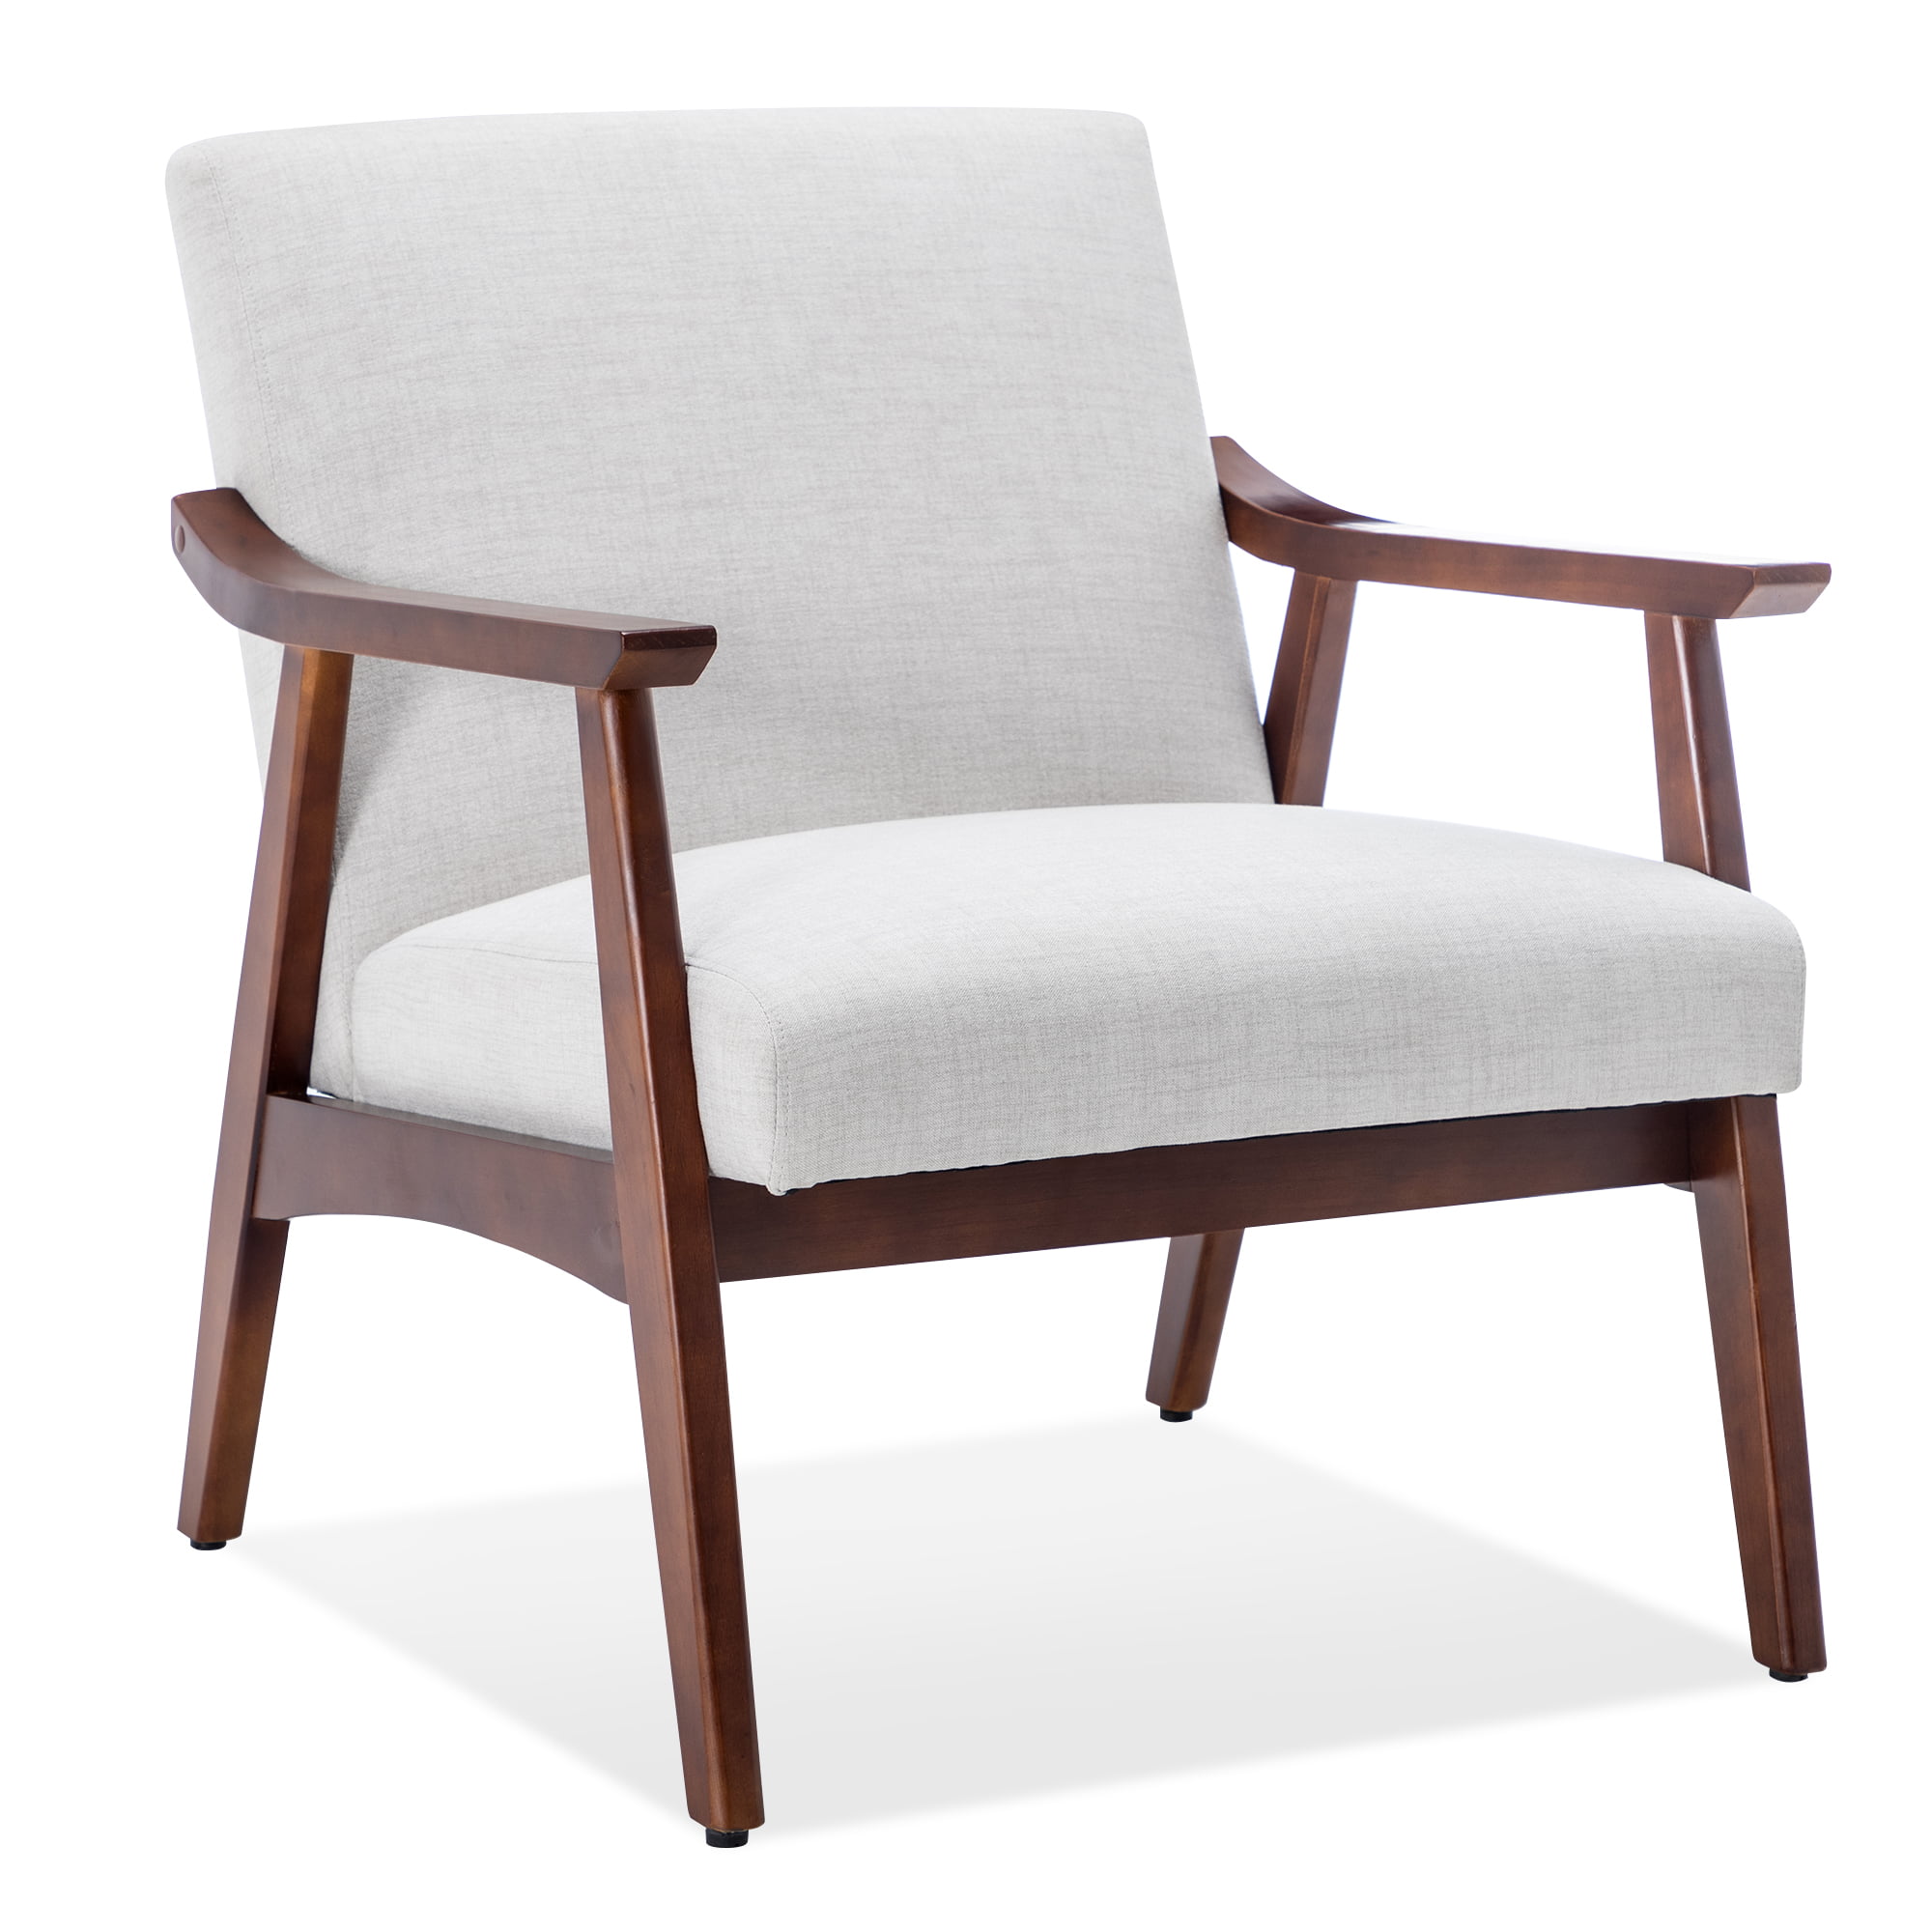 BELLEZE Mid-Century Modern Accent Chair Living Room Upholstered Faux